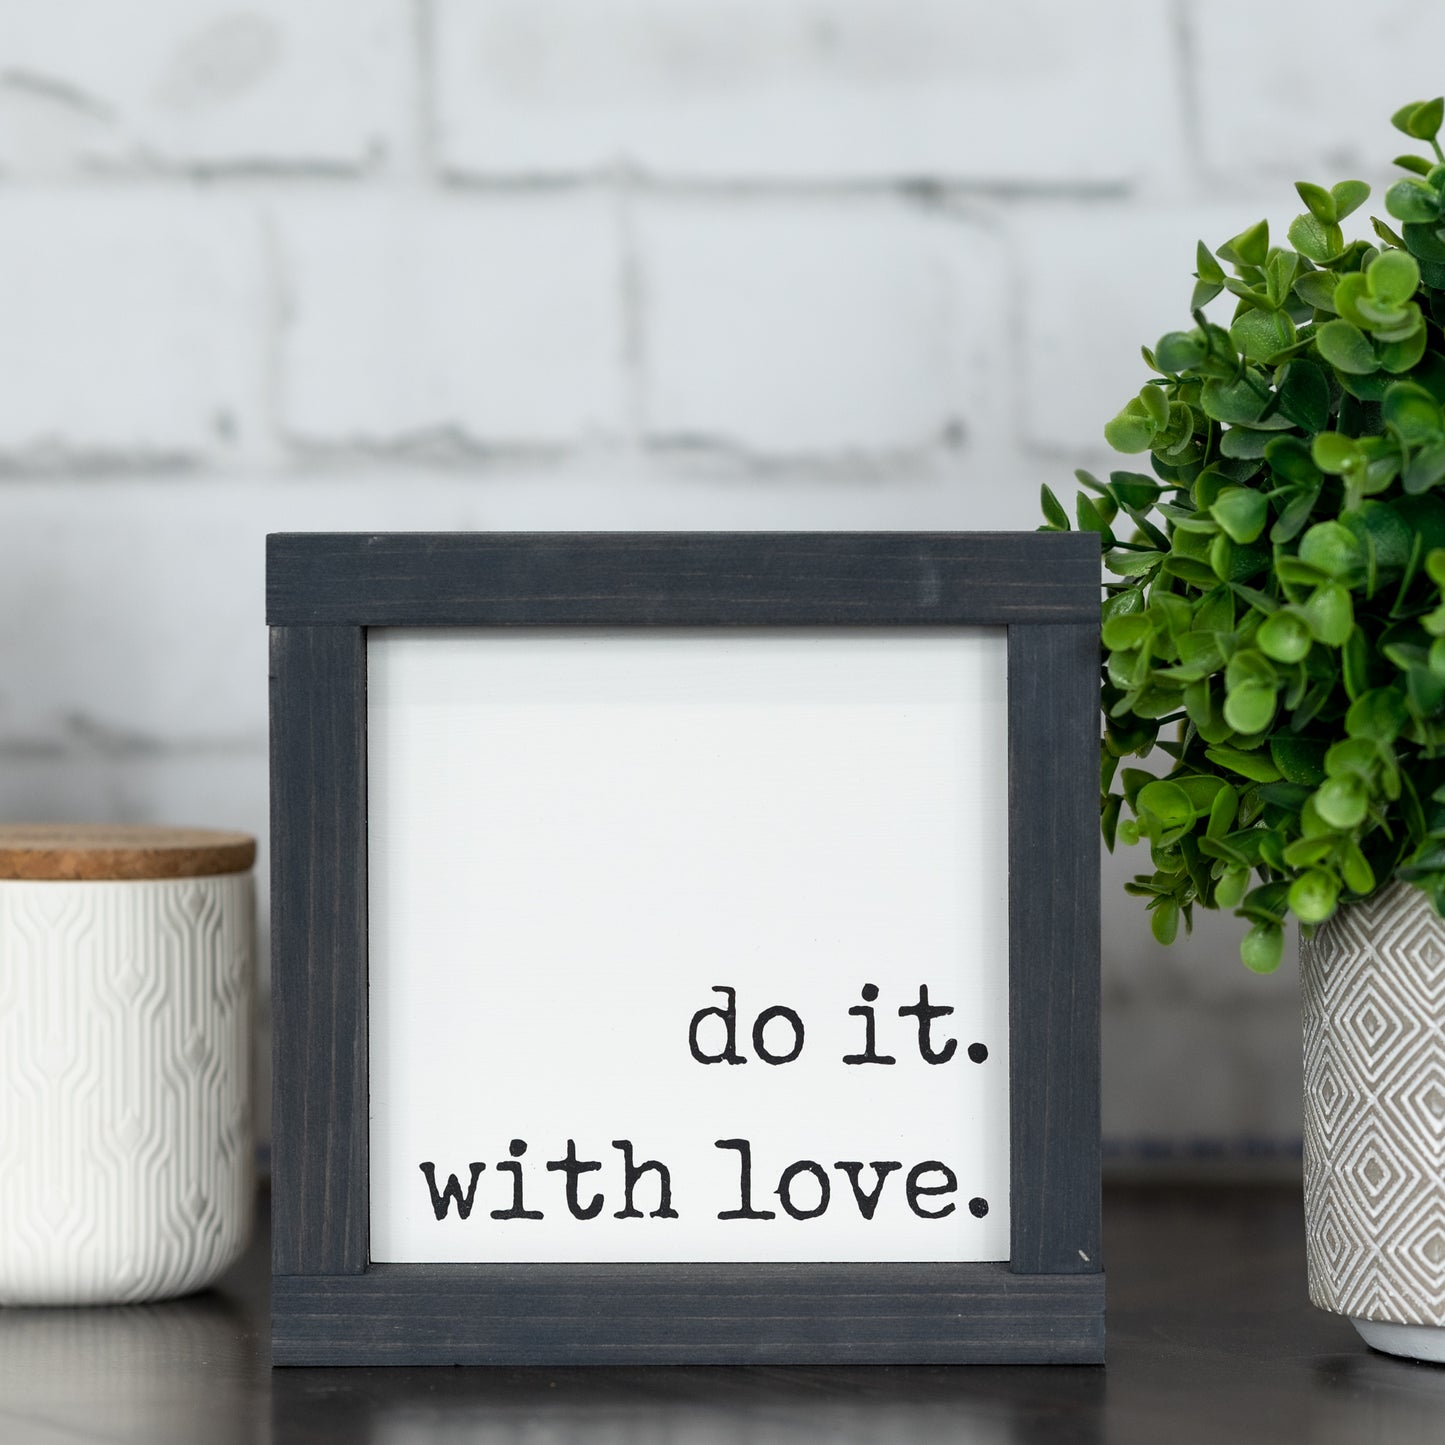 do it. with love ~ wood sign